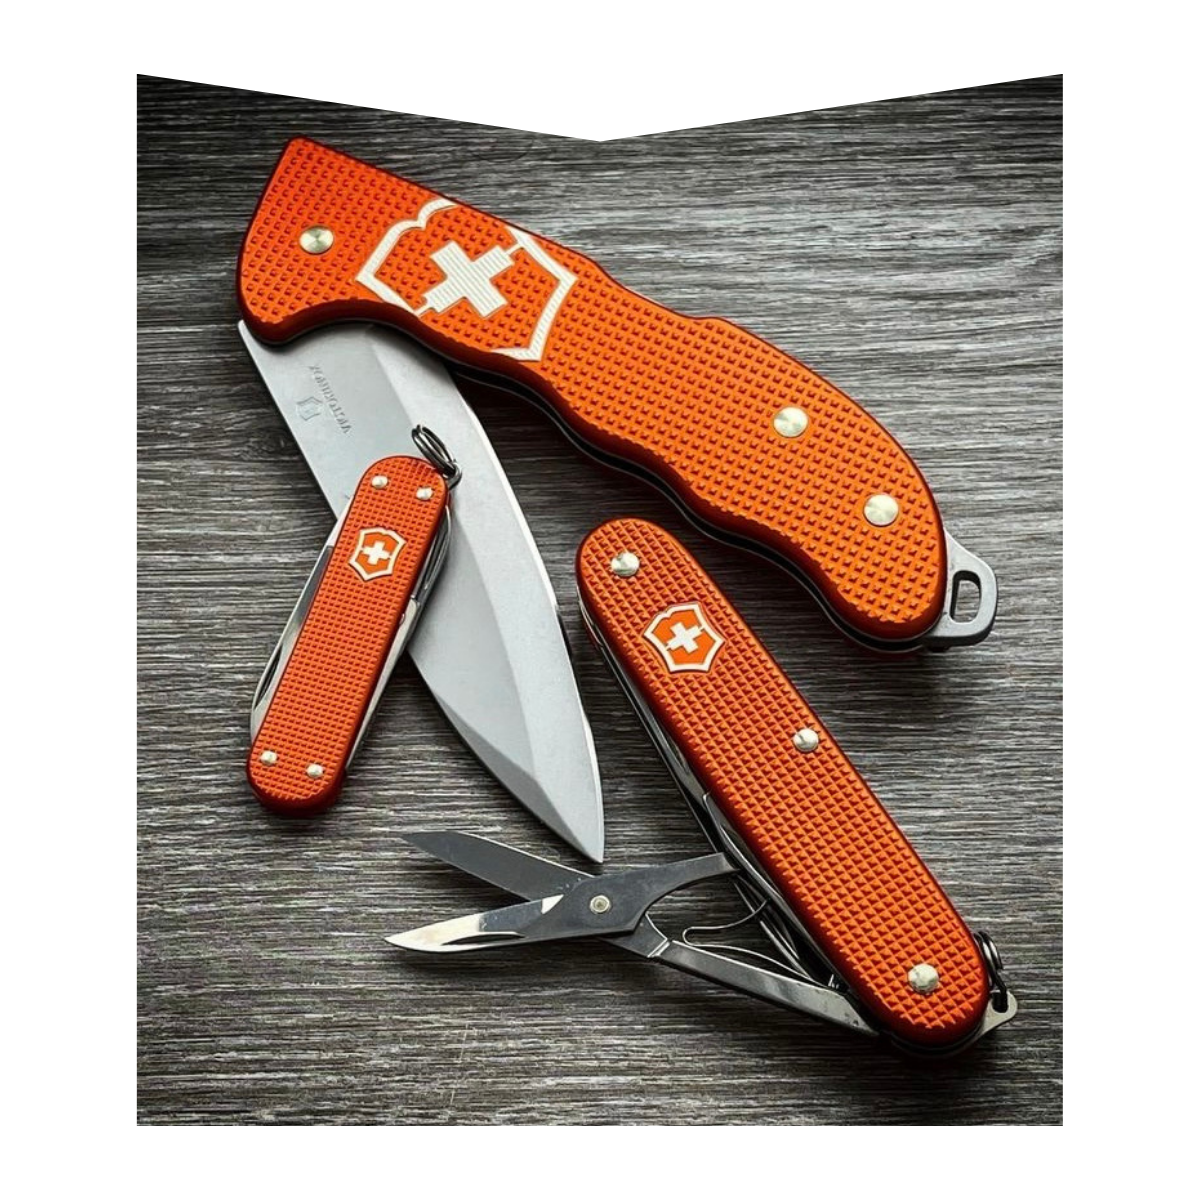 Swiss Army Knife from Hudson's Bay